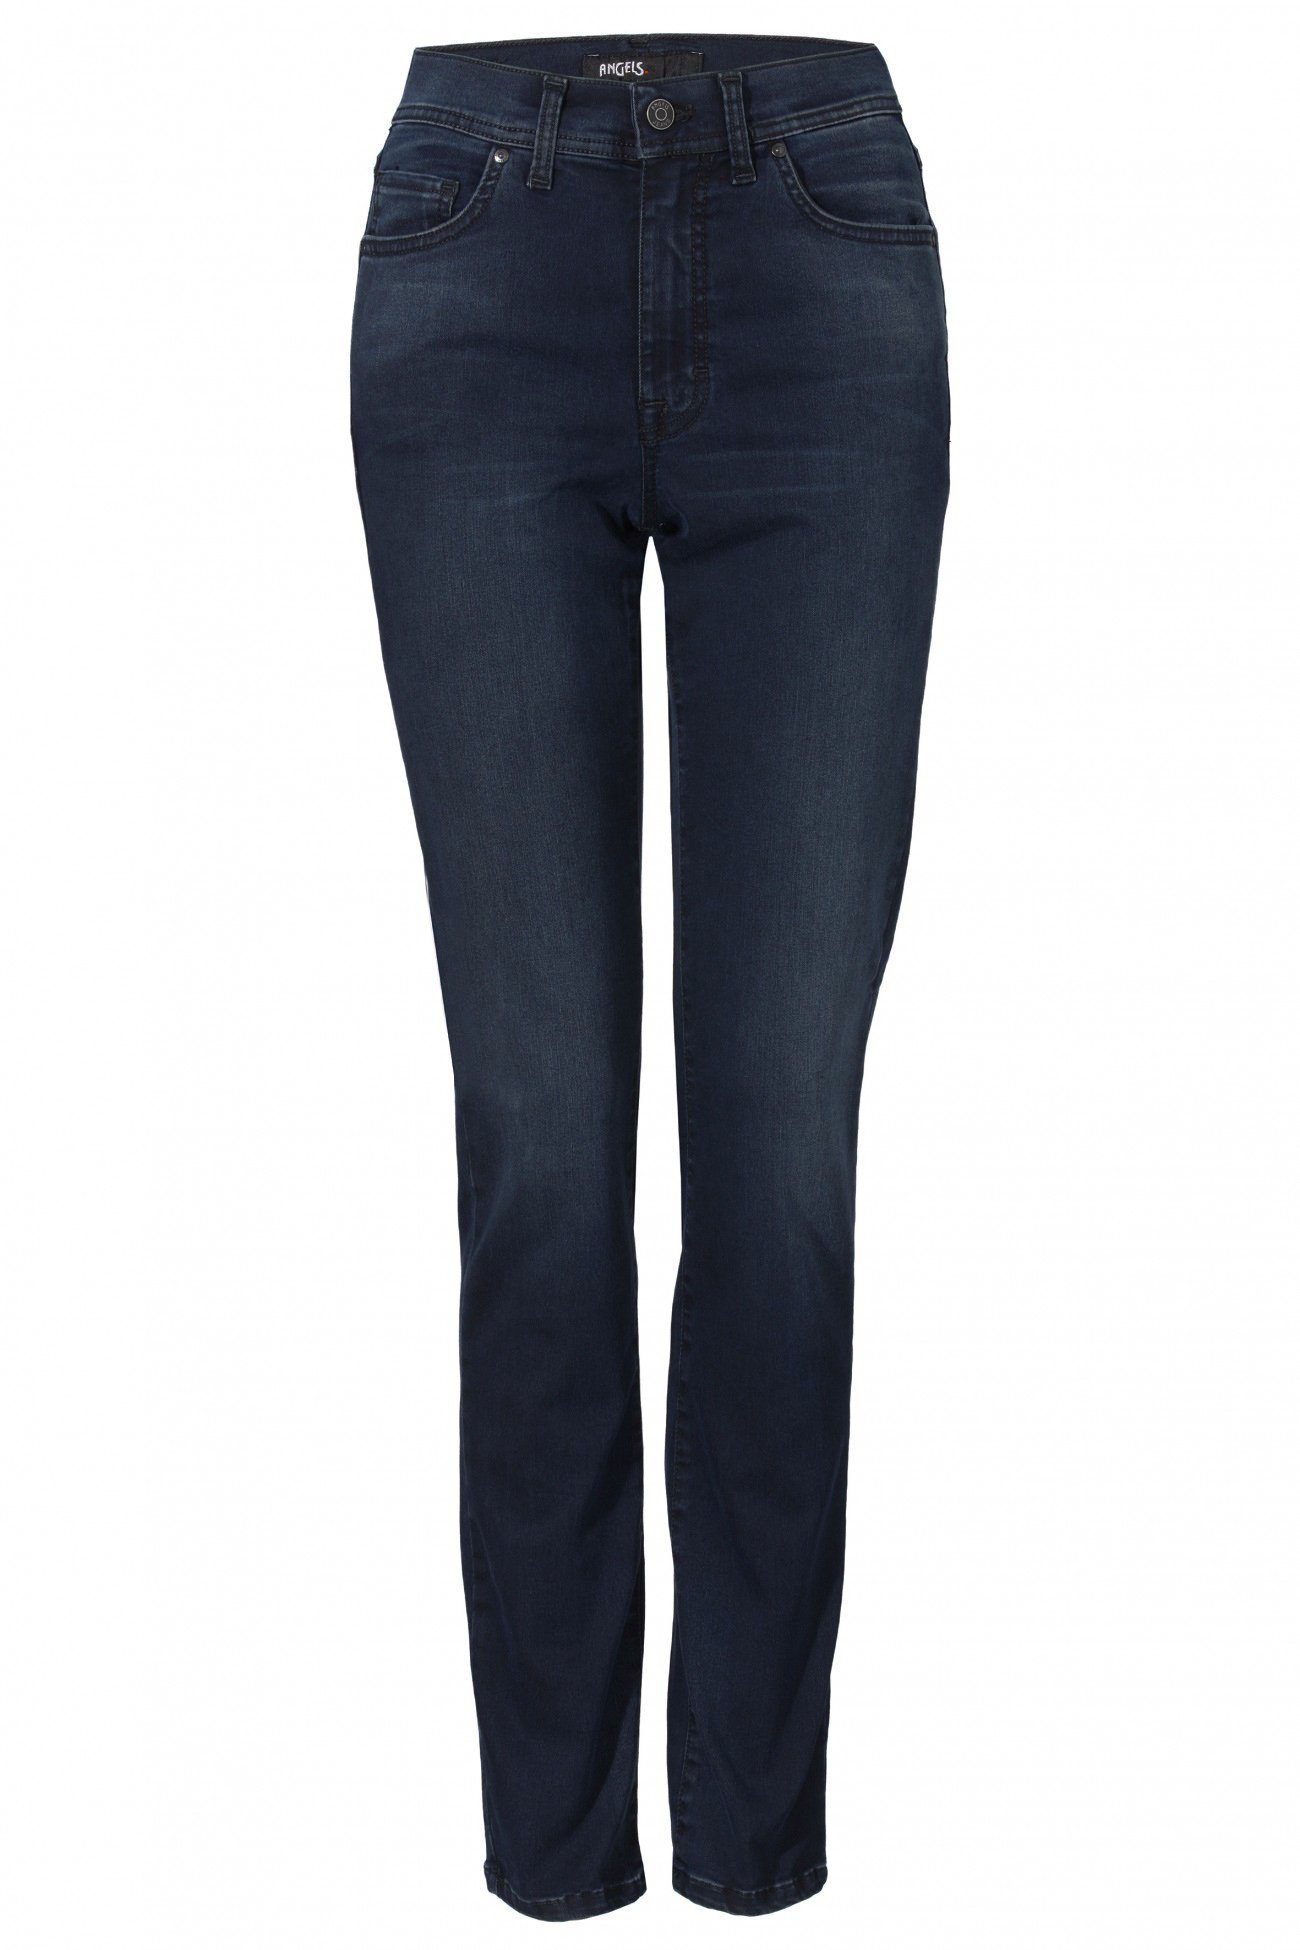 blue ANGELS Stretch-Jeans blue ANGELS CICI night JEANS 34.30 519 30 night